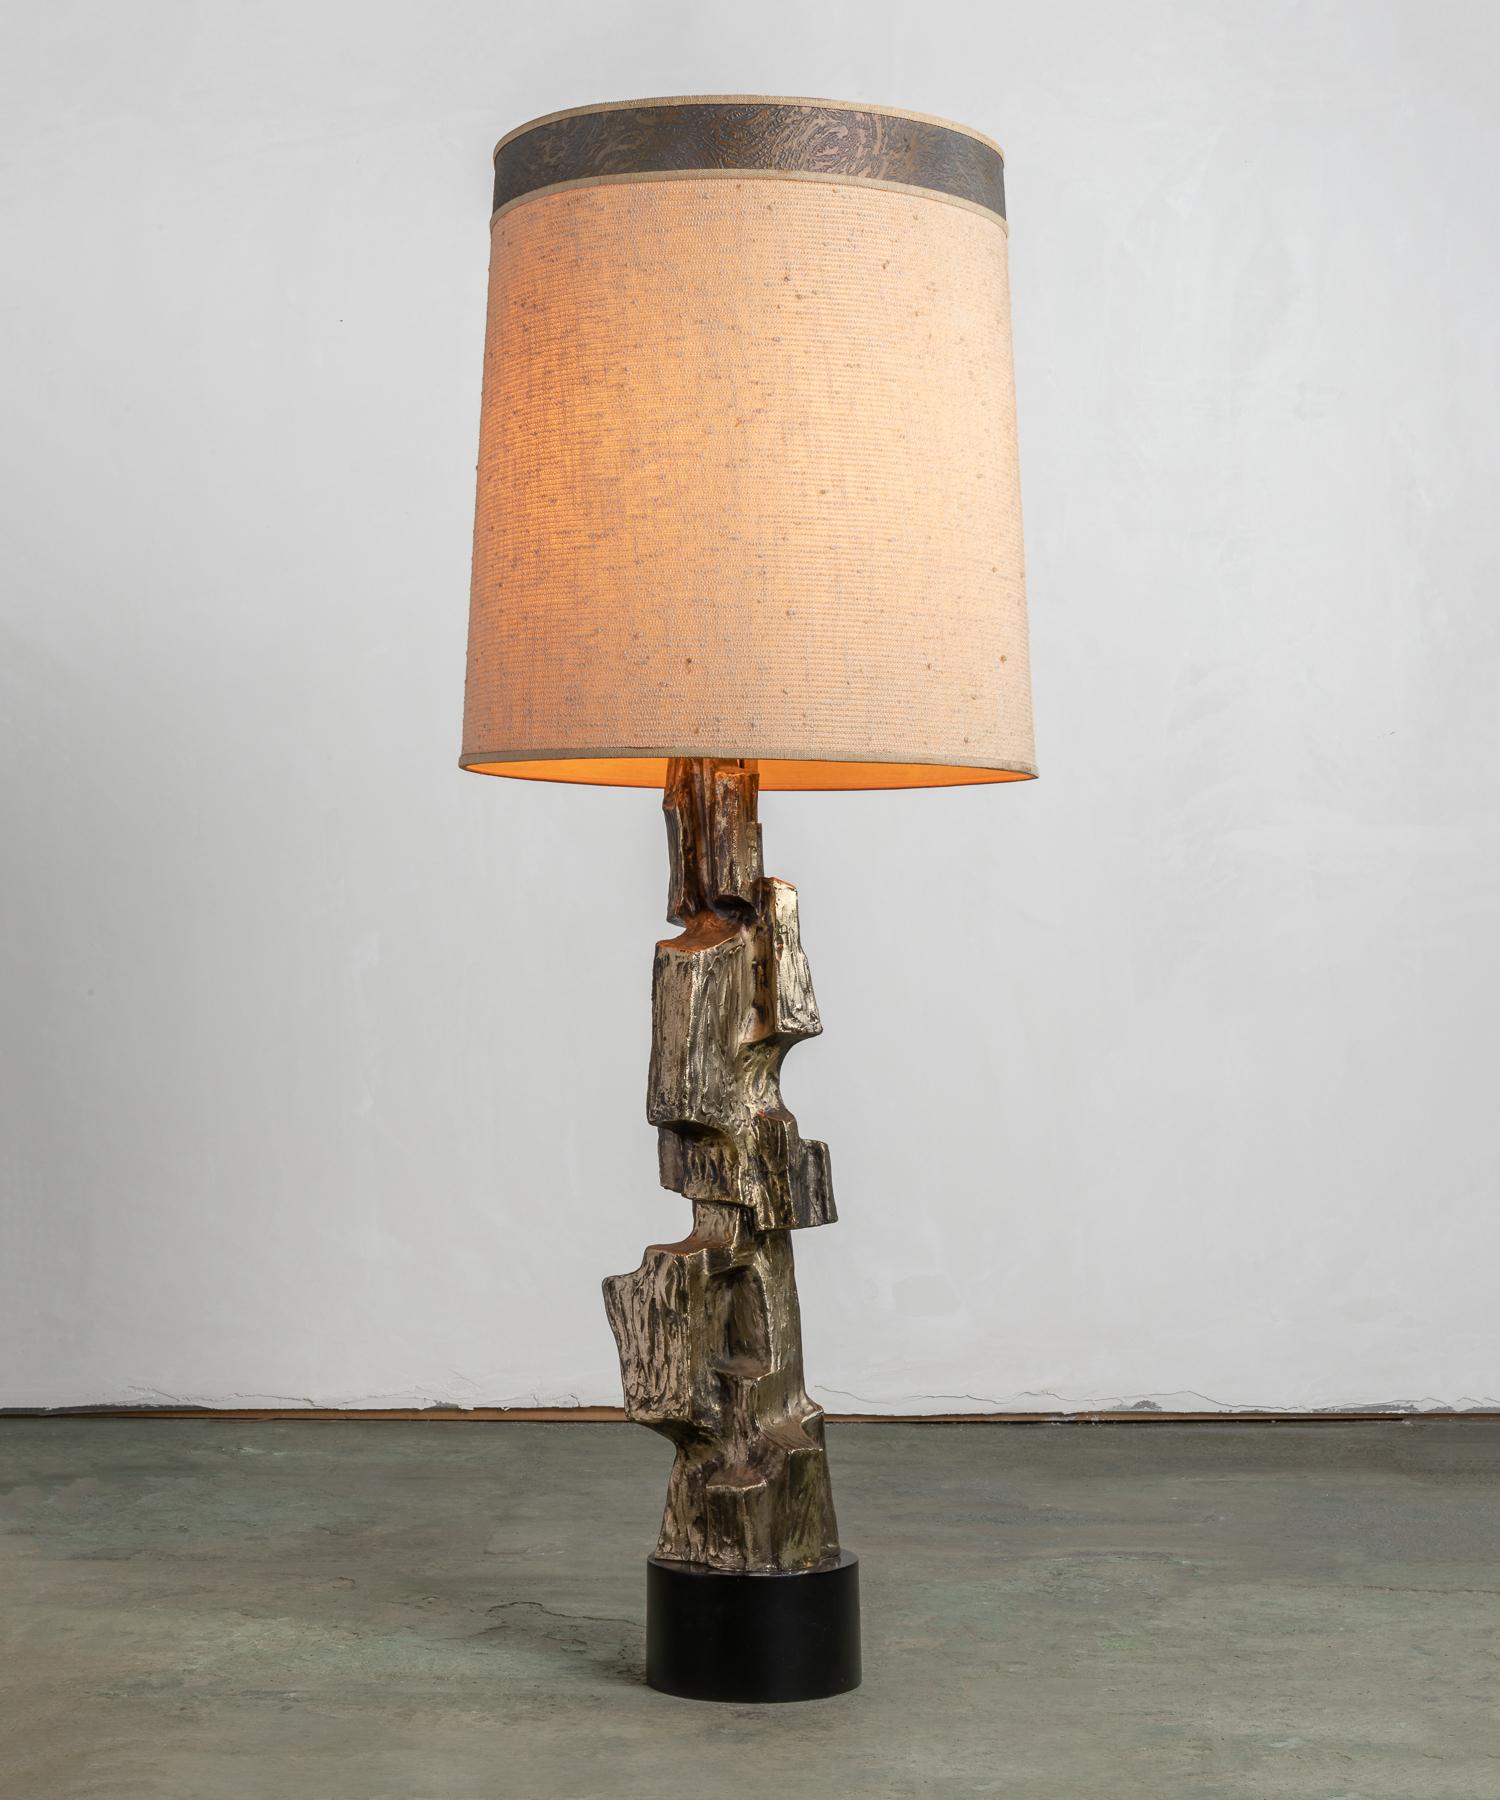 Bronze Brutalist Tempestini table lamp, circa 1960.

A large size includes a unique cast bronze stand with Brutalist and cubist inspiration along with original shade with unique top detailing.